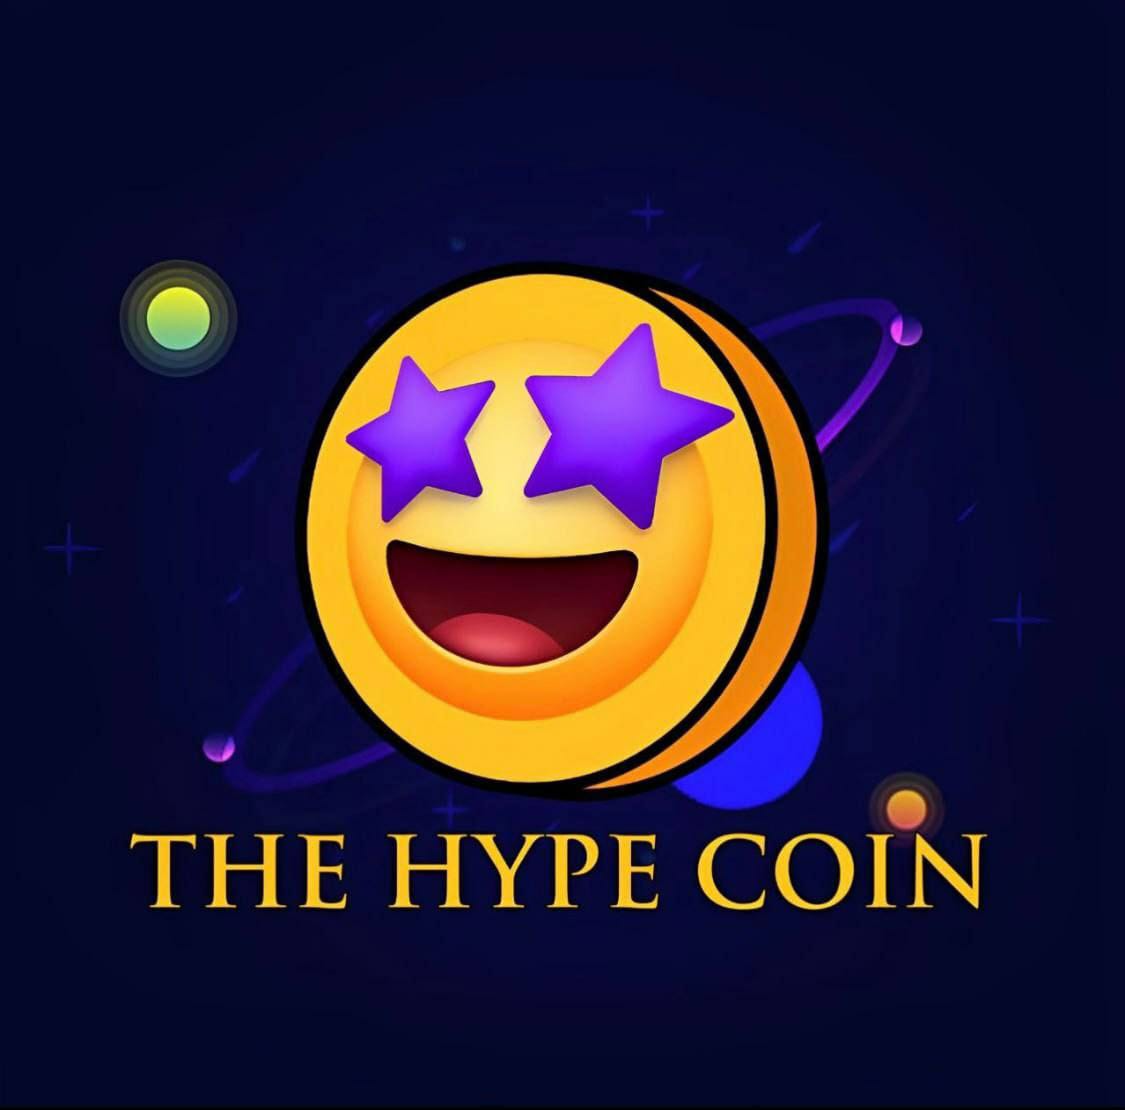 Dogecoin Early Adopter launches “The Hype Coin” creating a new opportunity for investors to cash in.